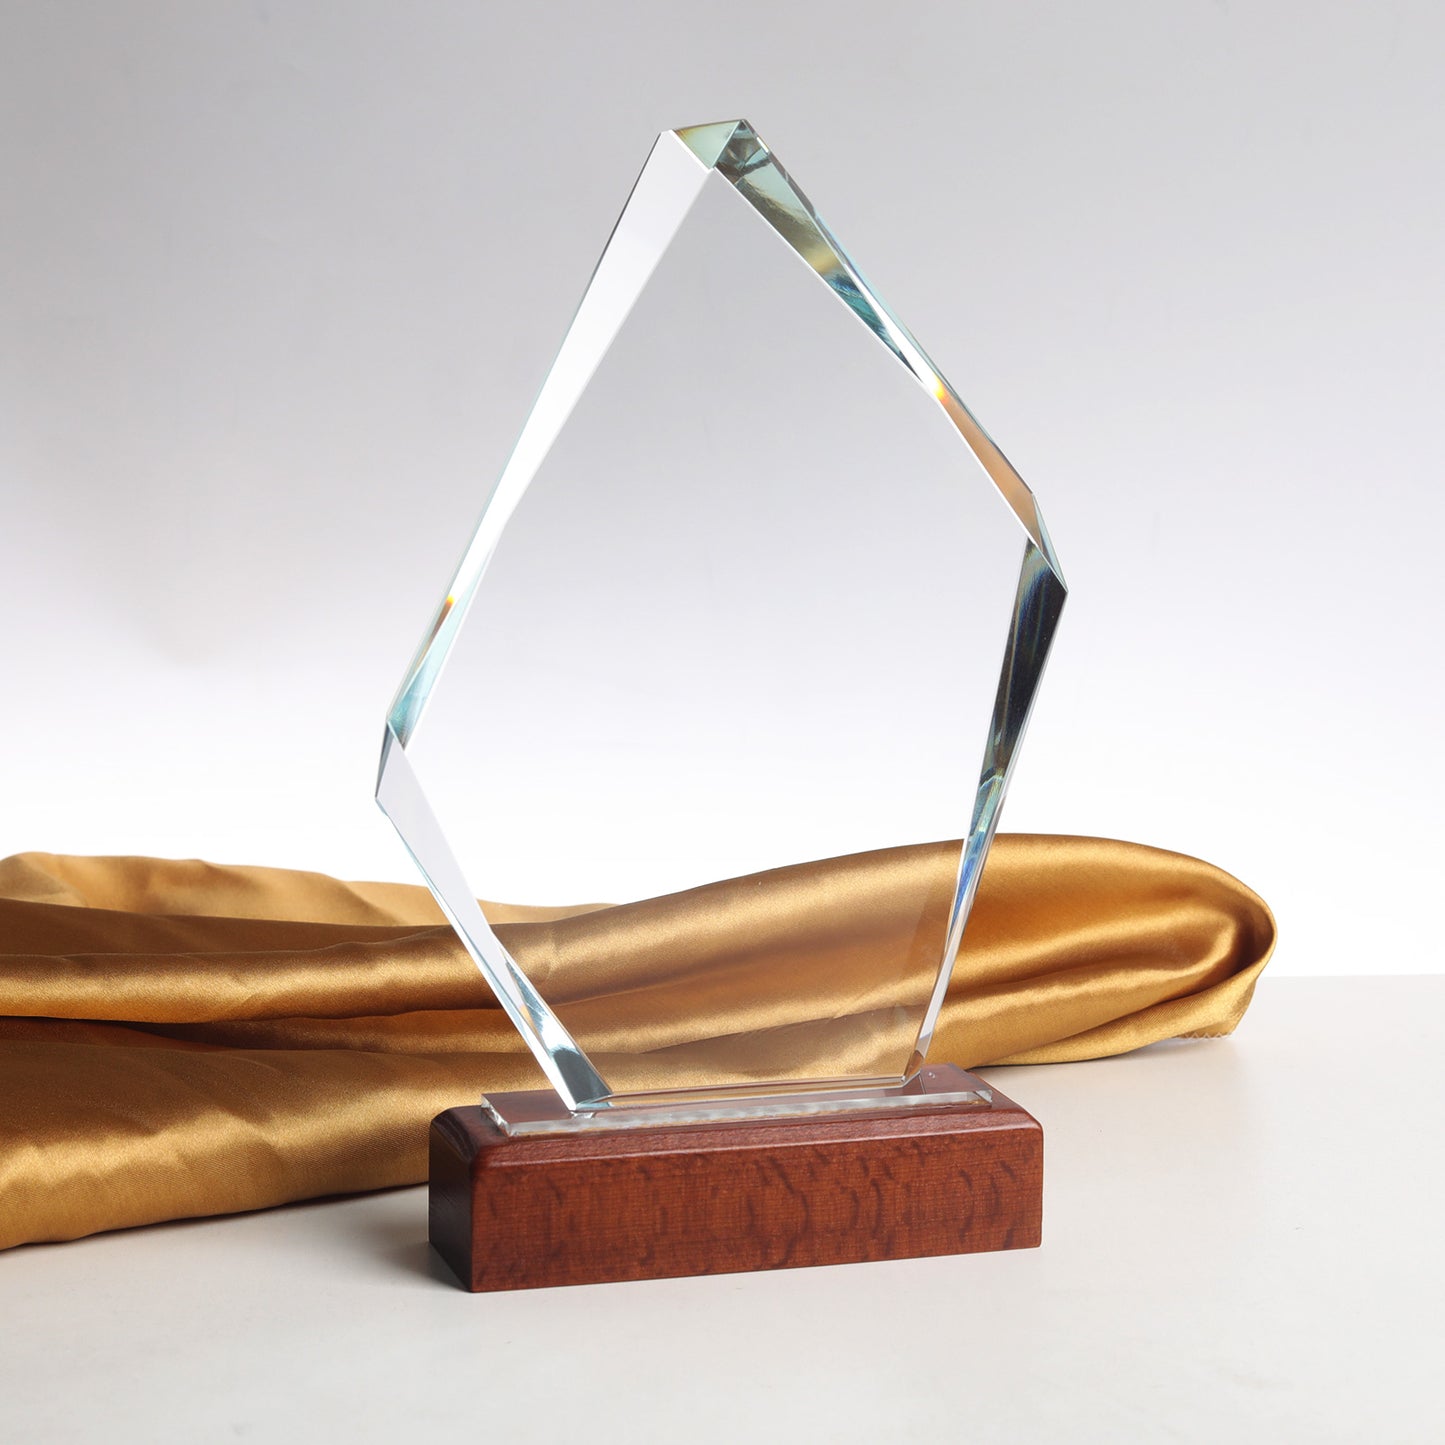 JNCT-193 Longwin Rhombic Crystal Trophy with Wooden Base